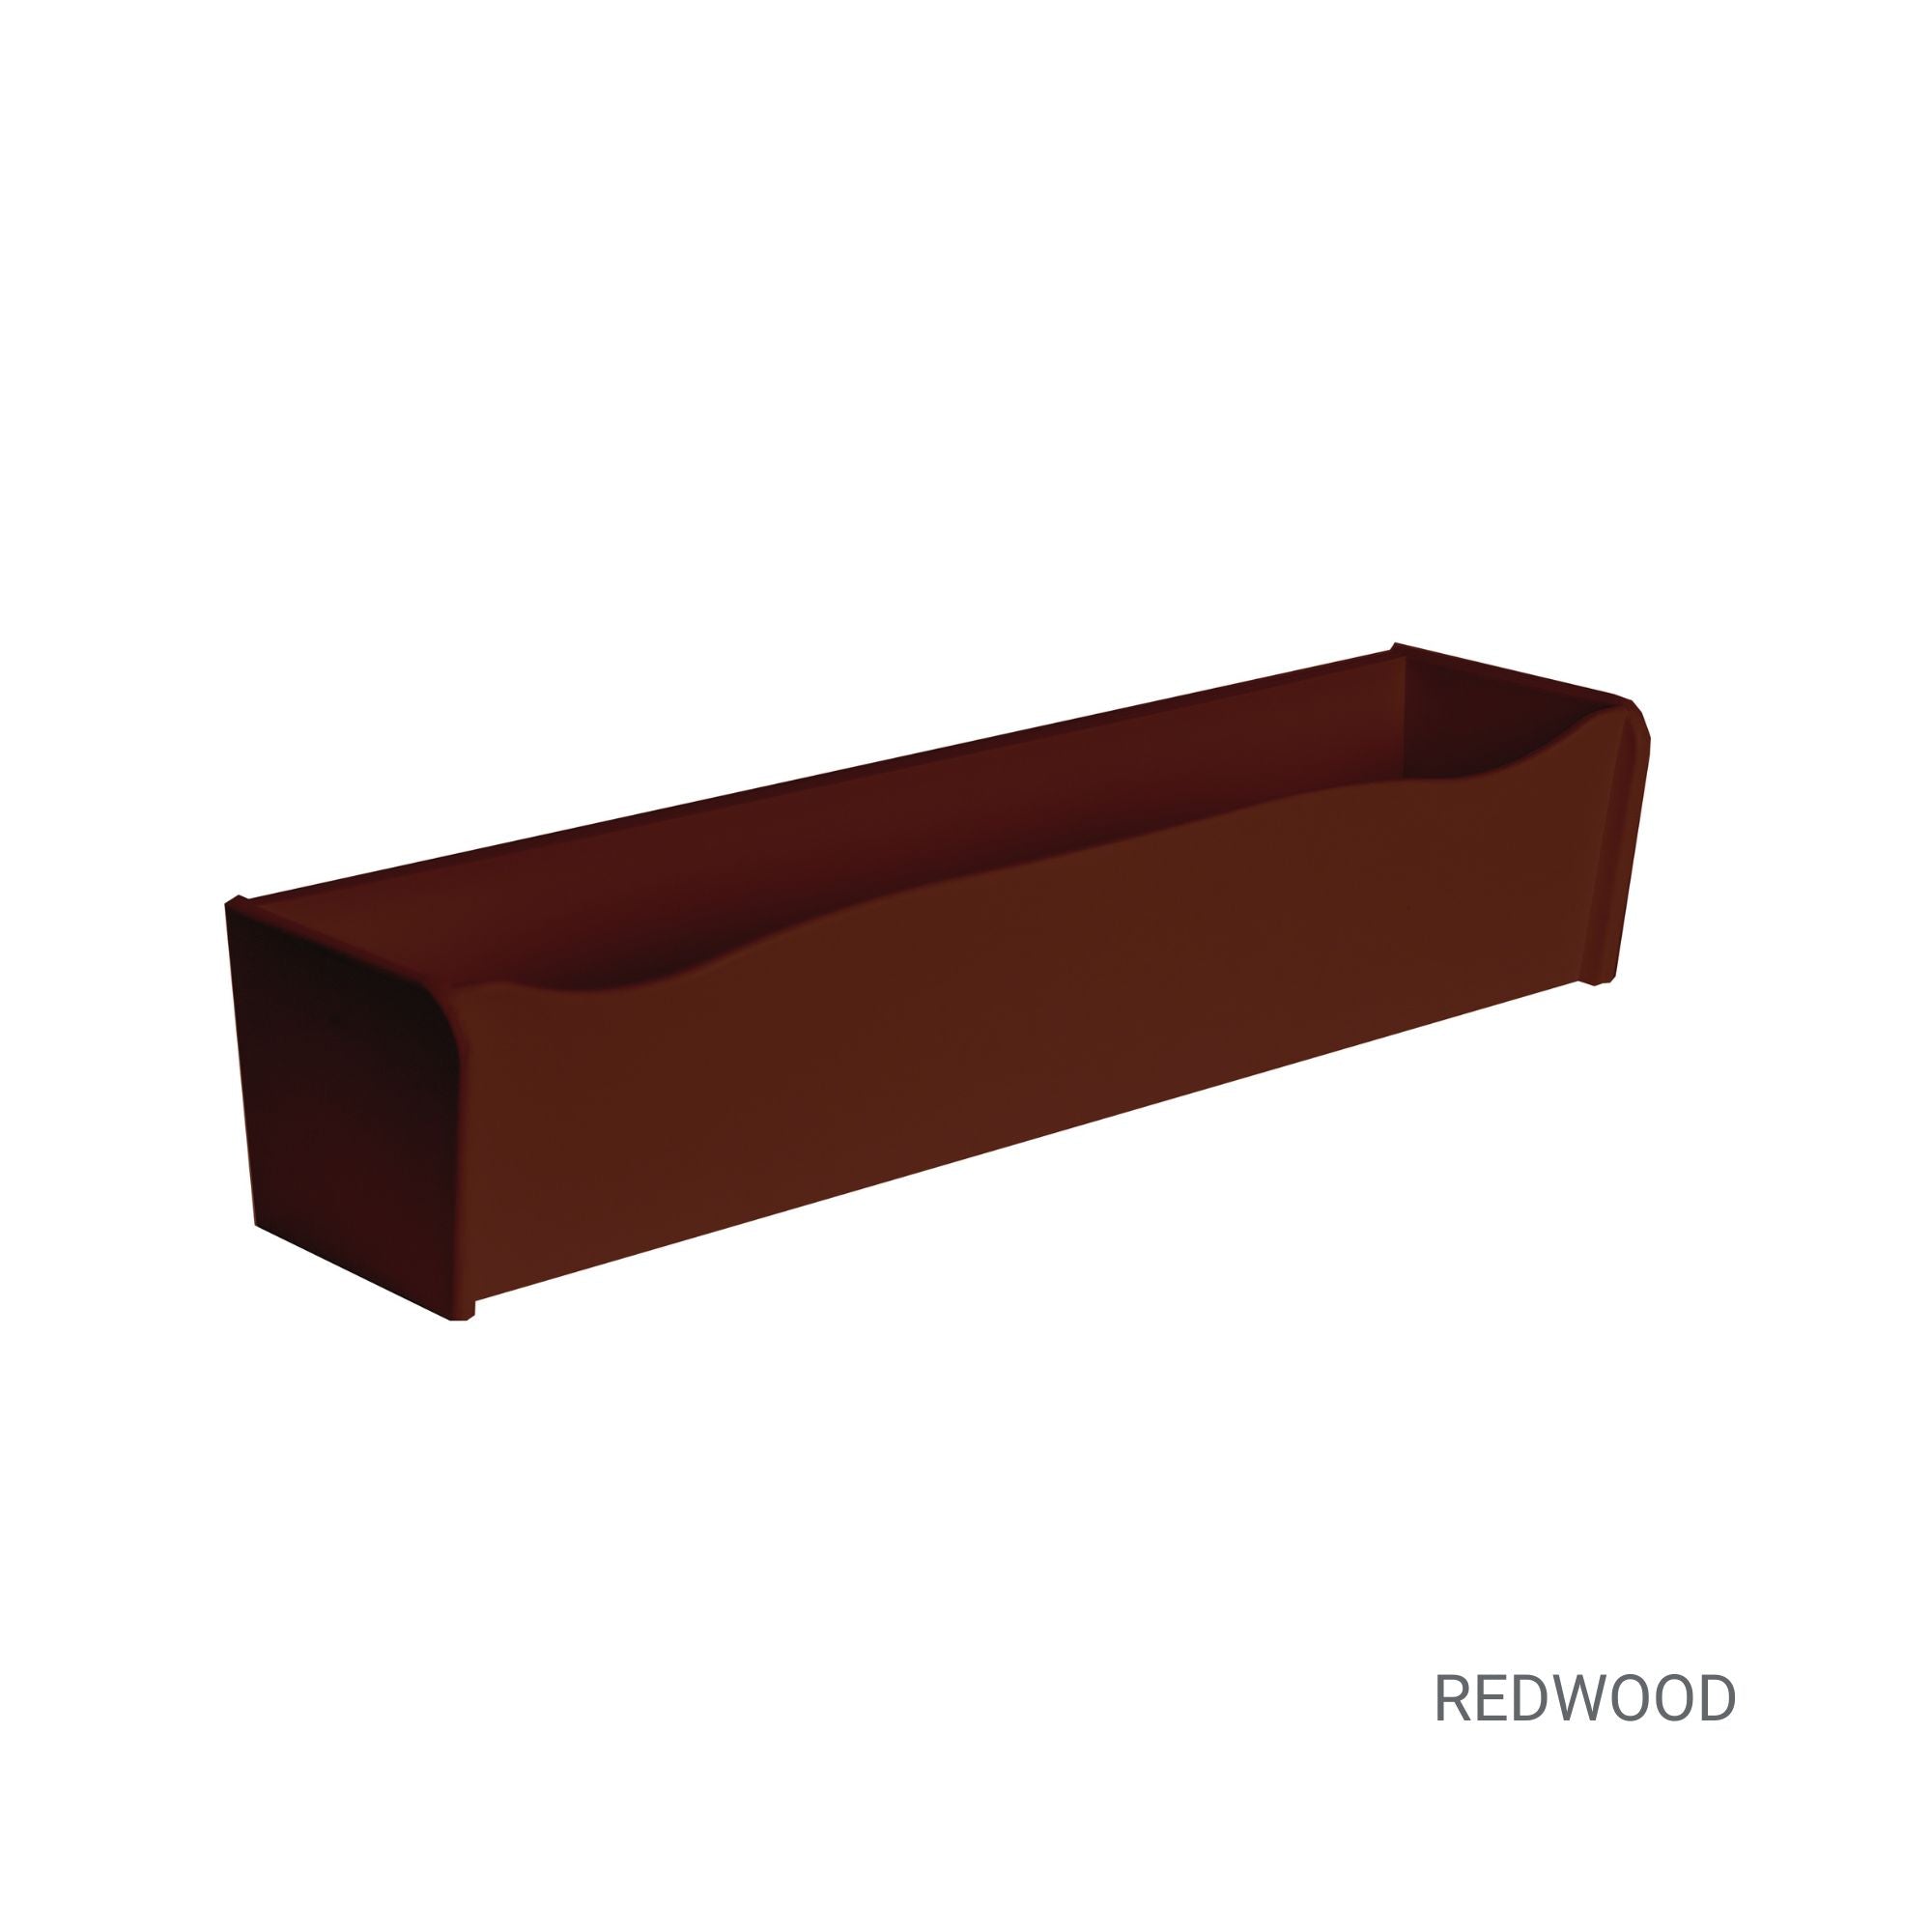 24" x 6" x 5" Flower Box in Redwood for Window Sills, Sheds, Playhouses, and MORE